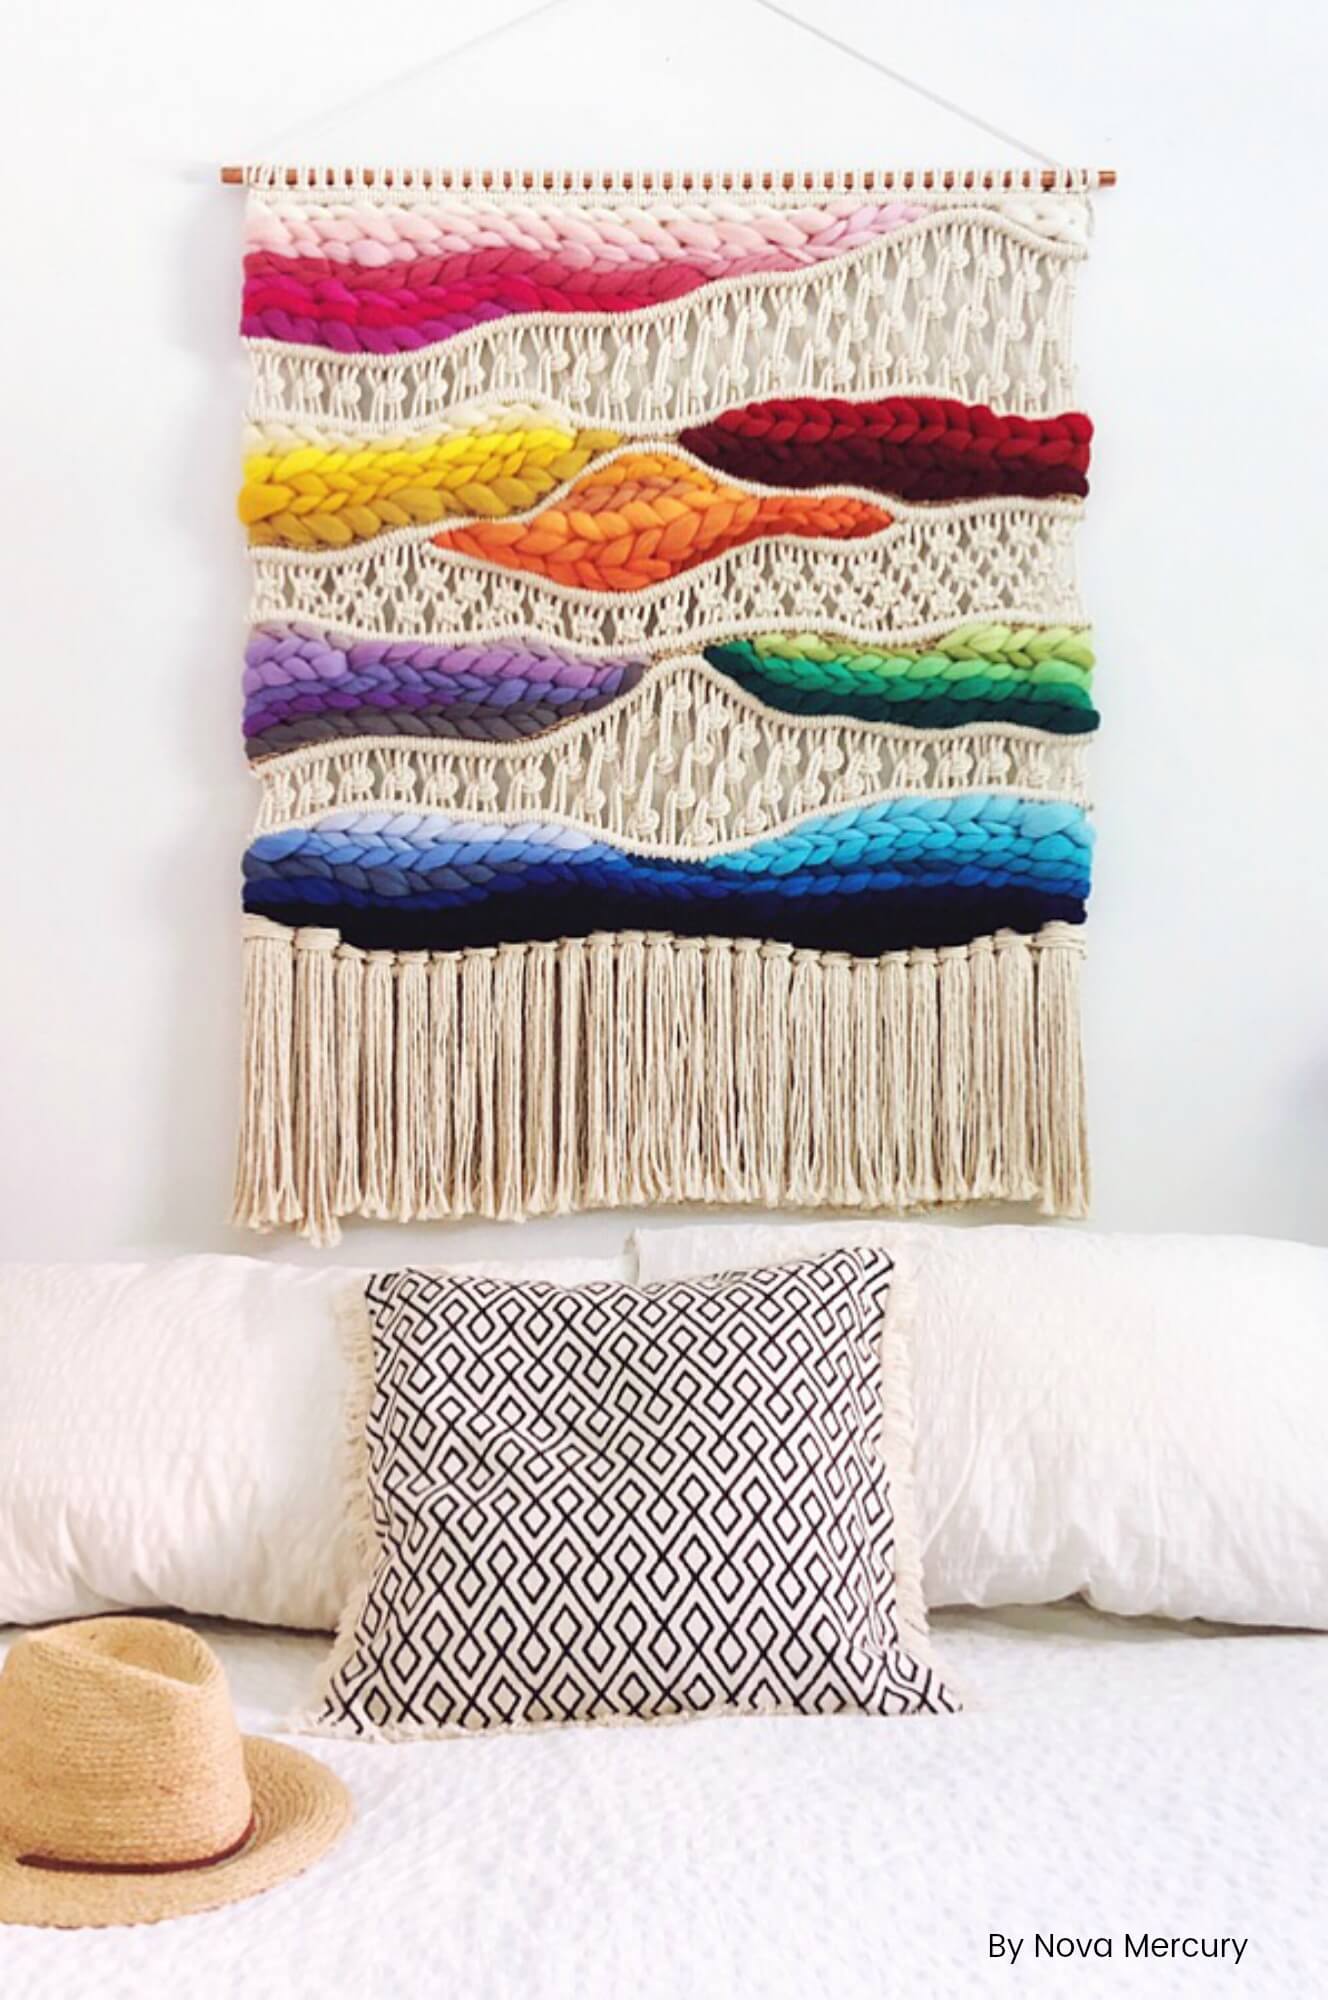 A large macrame wall hanging hangs over a white bed. The wall hanging is made with tan yarn with blocks of bright primary rainbow colors.